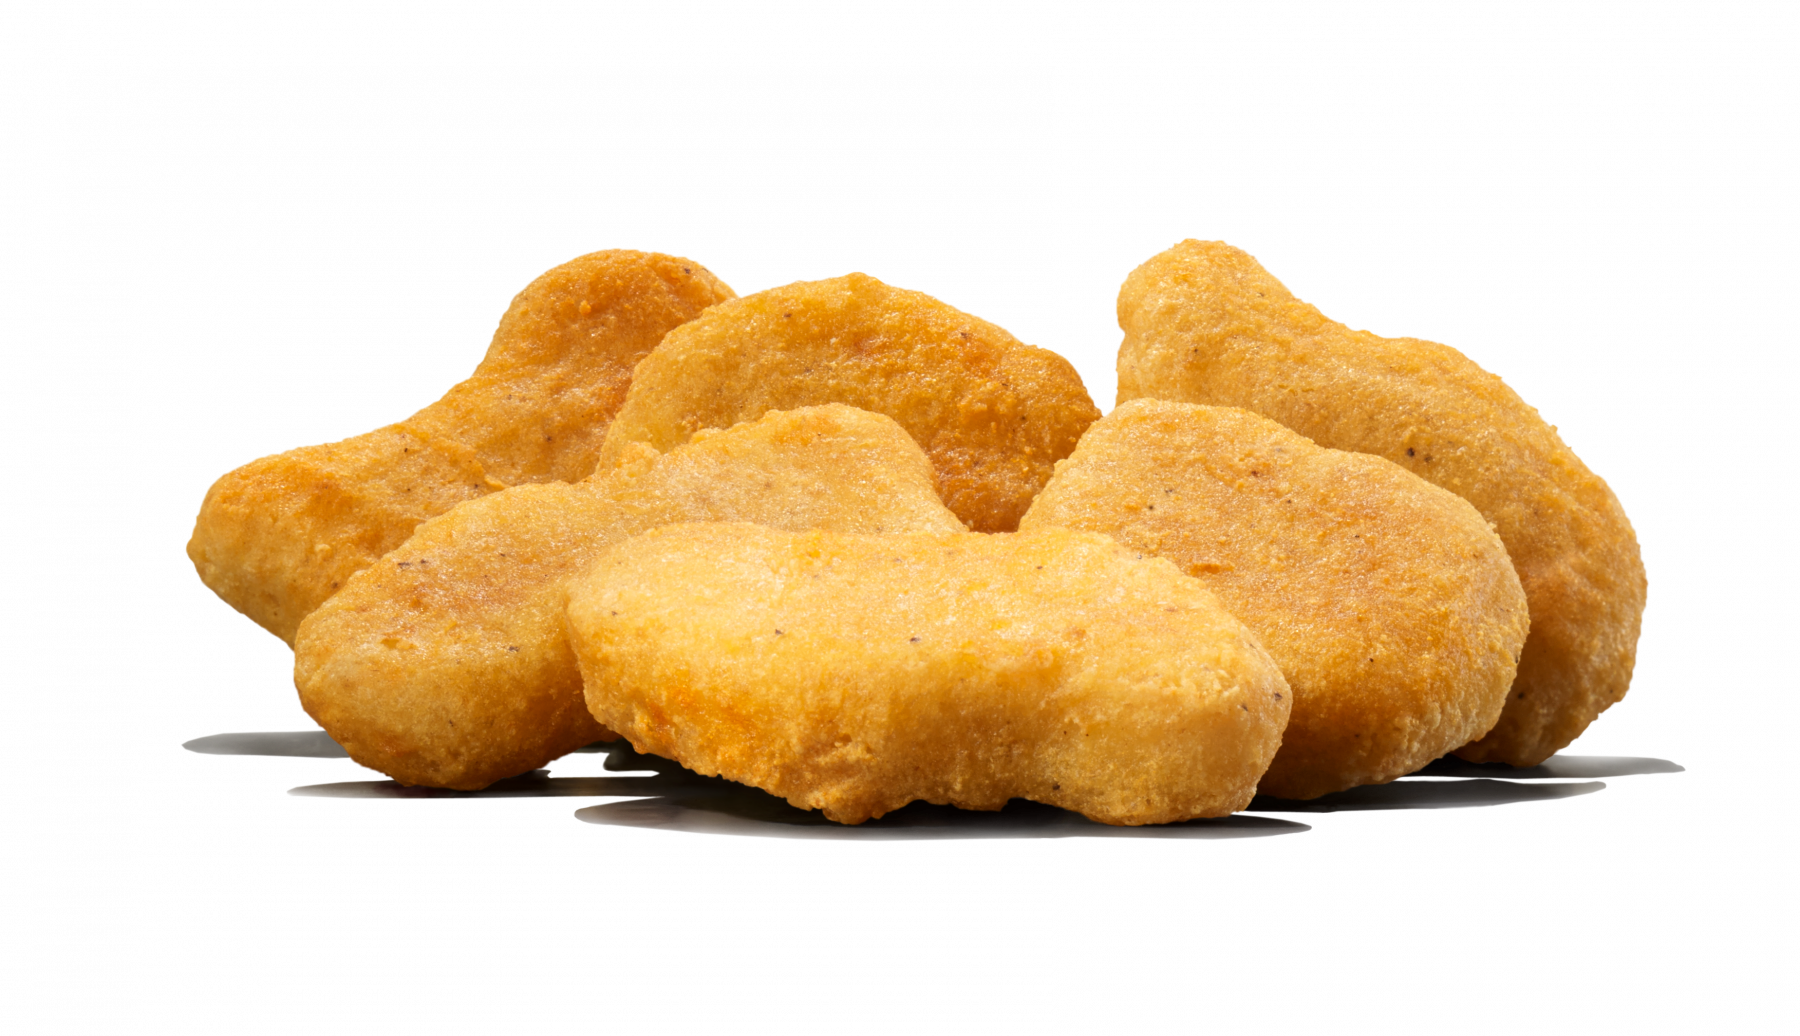 Dill pickle chicken nuggets burger king